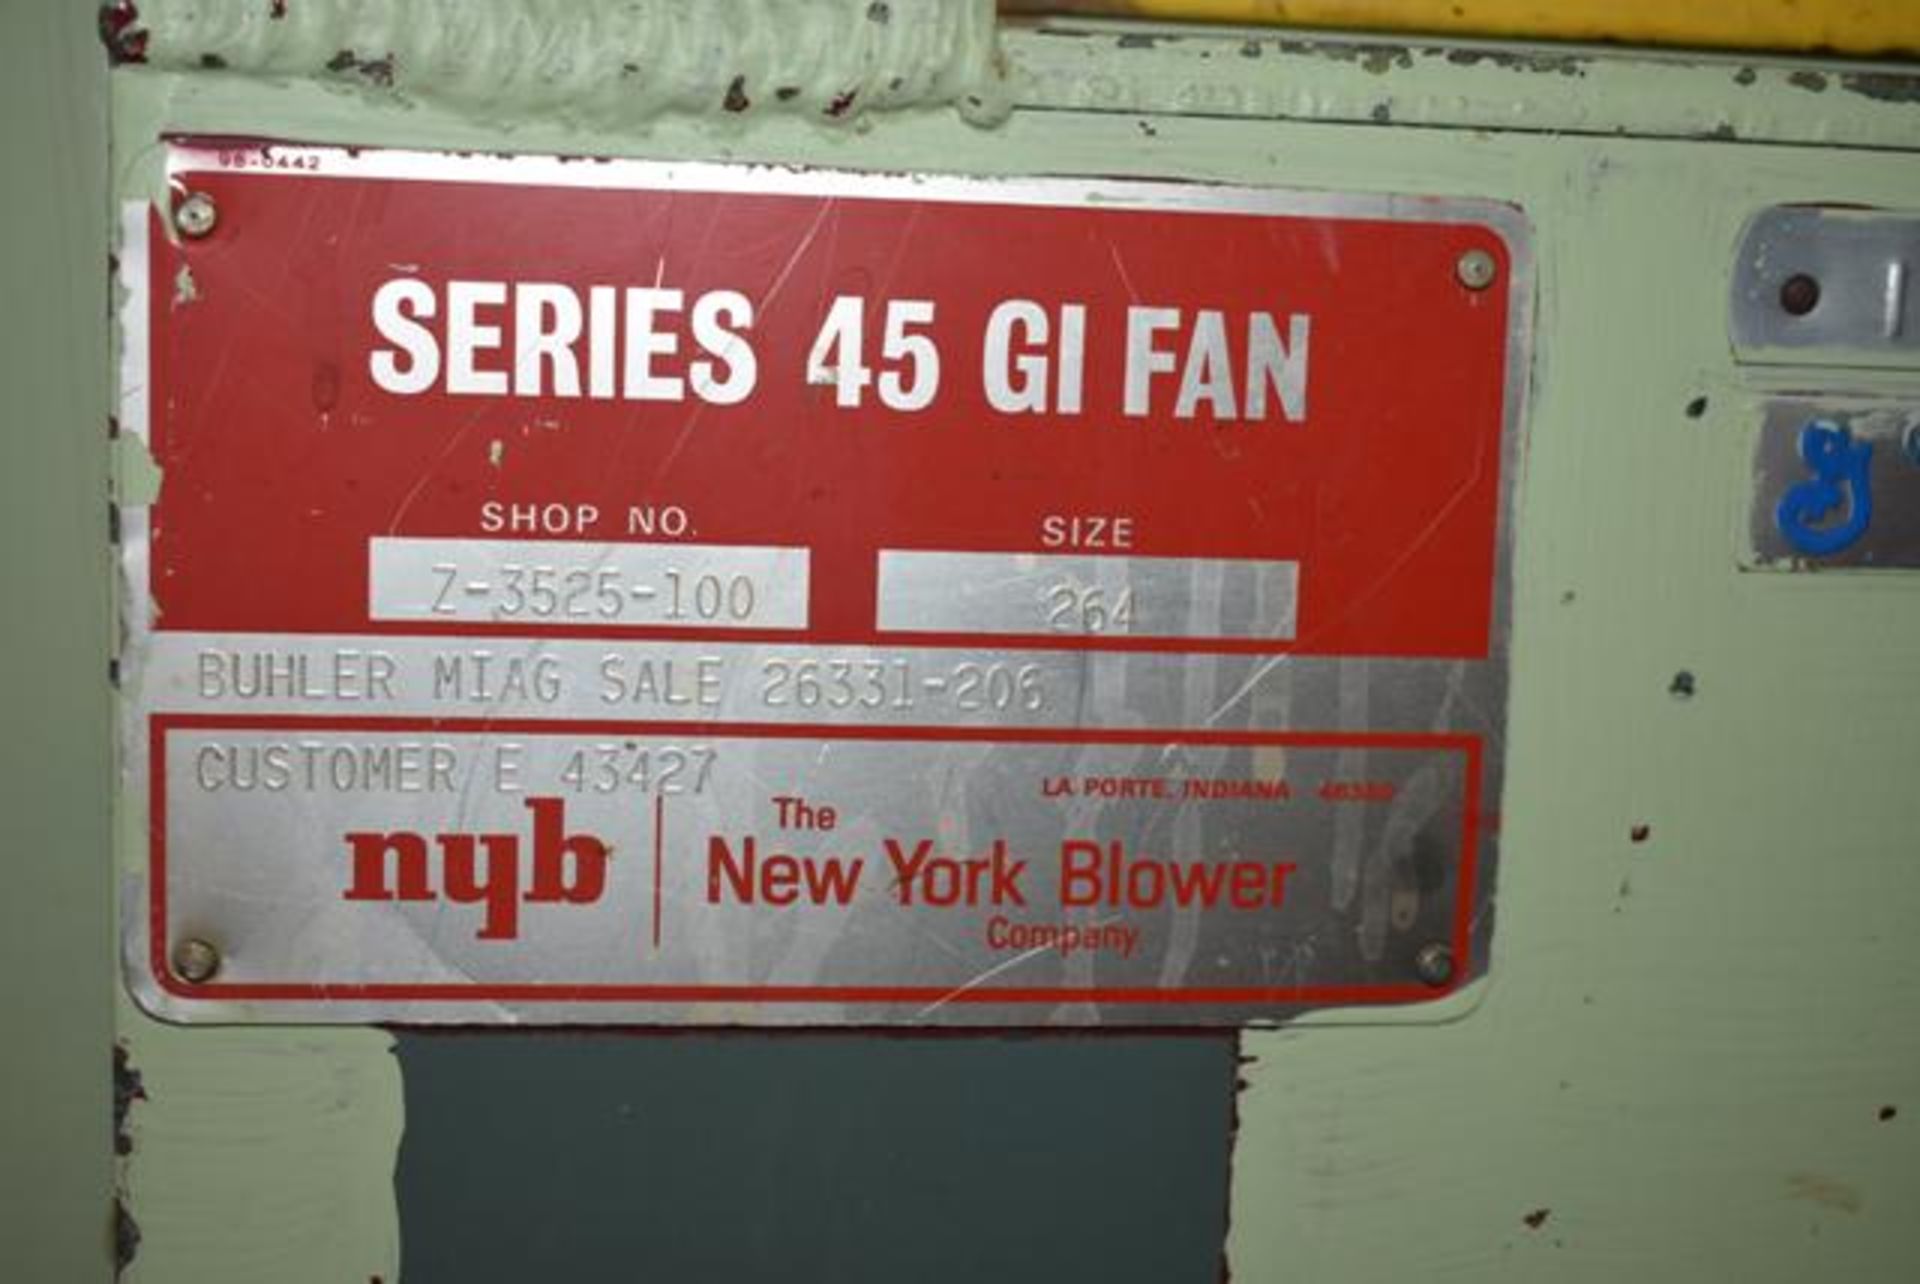 New York Blower, Size 264/Series 45 GI Fan, Note - No Motor - Image 2 of 3